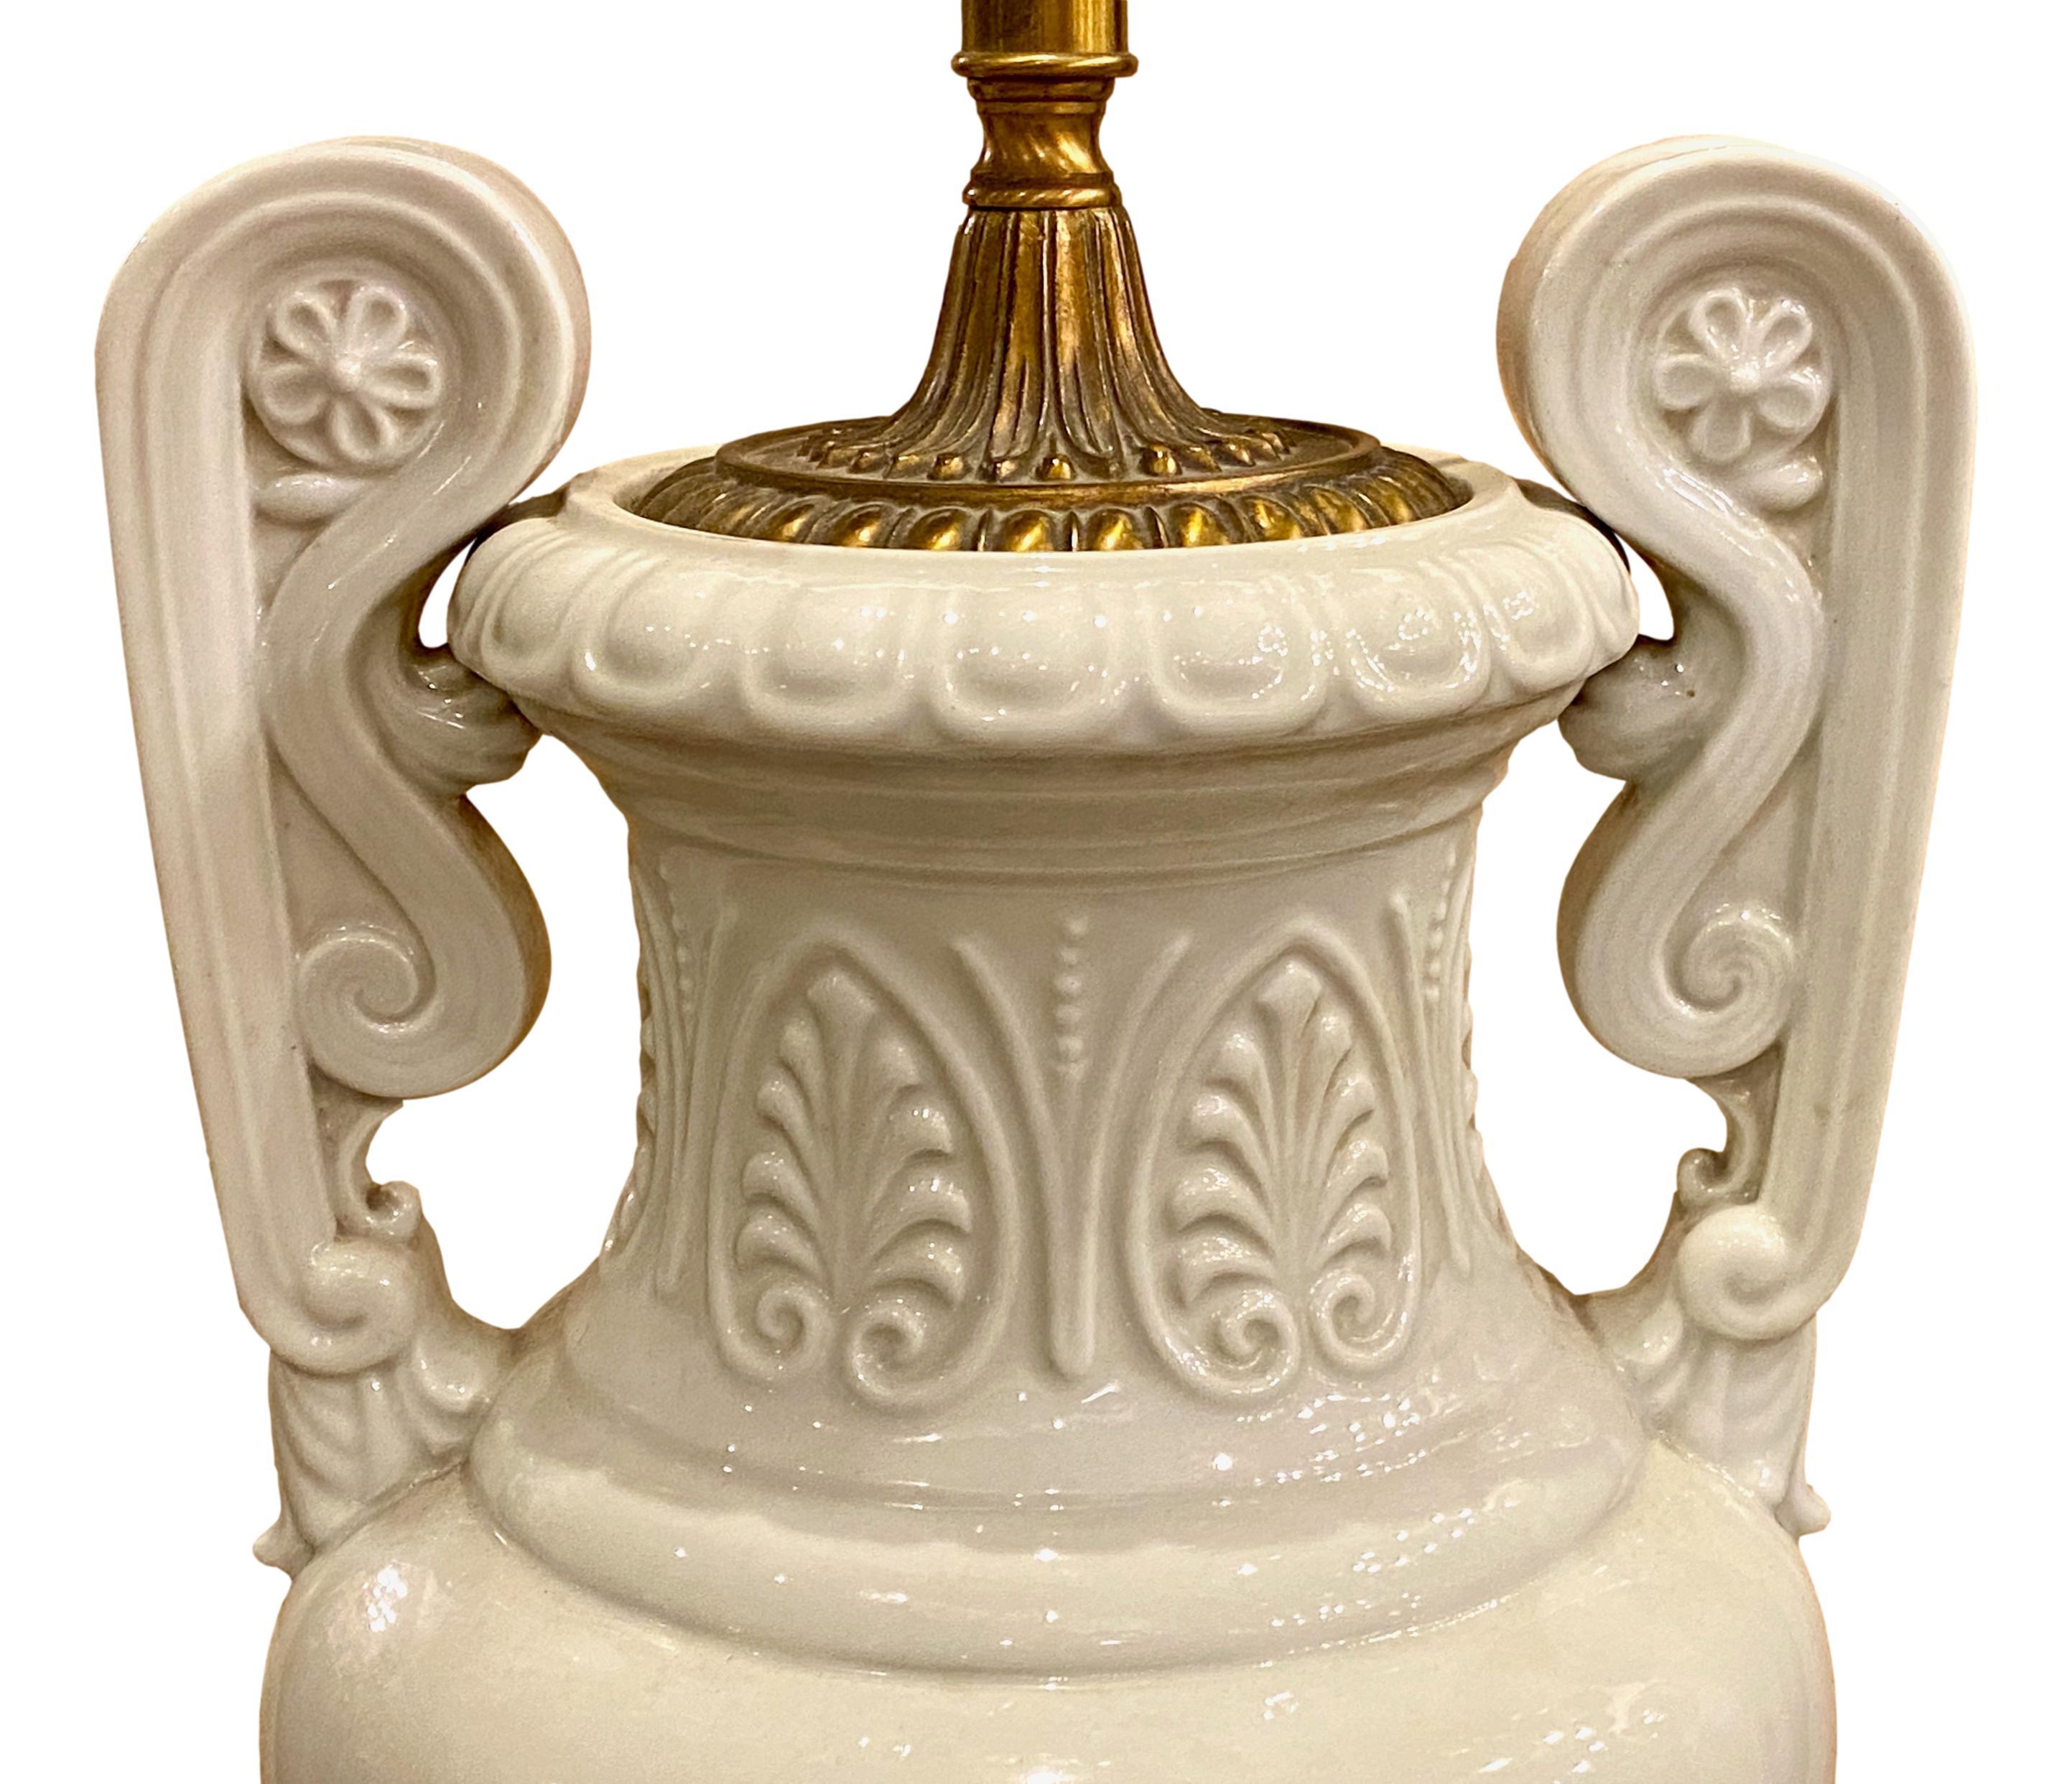 A large circa 1920's French Art Nouveau style white porcelain urn-shaped table lamp with mask and foliage details in relief on body and pedestal base.

Measurements:
Height of body: 28